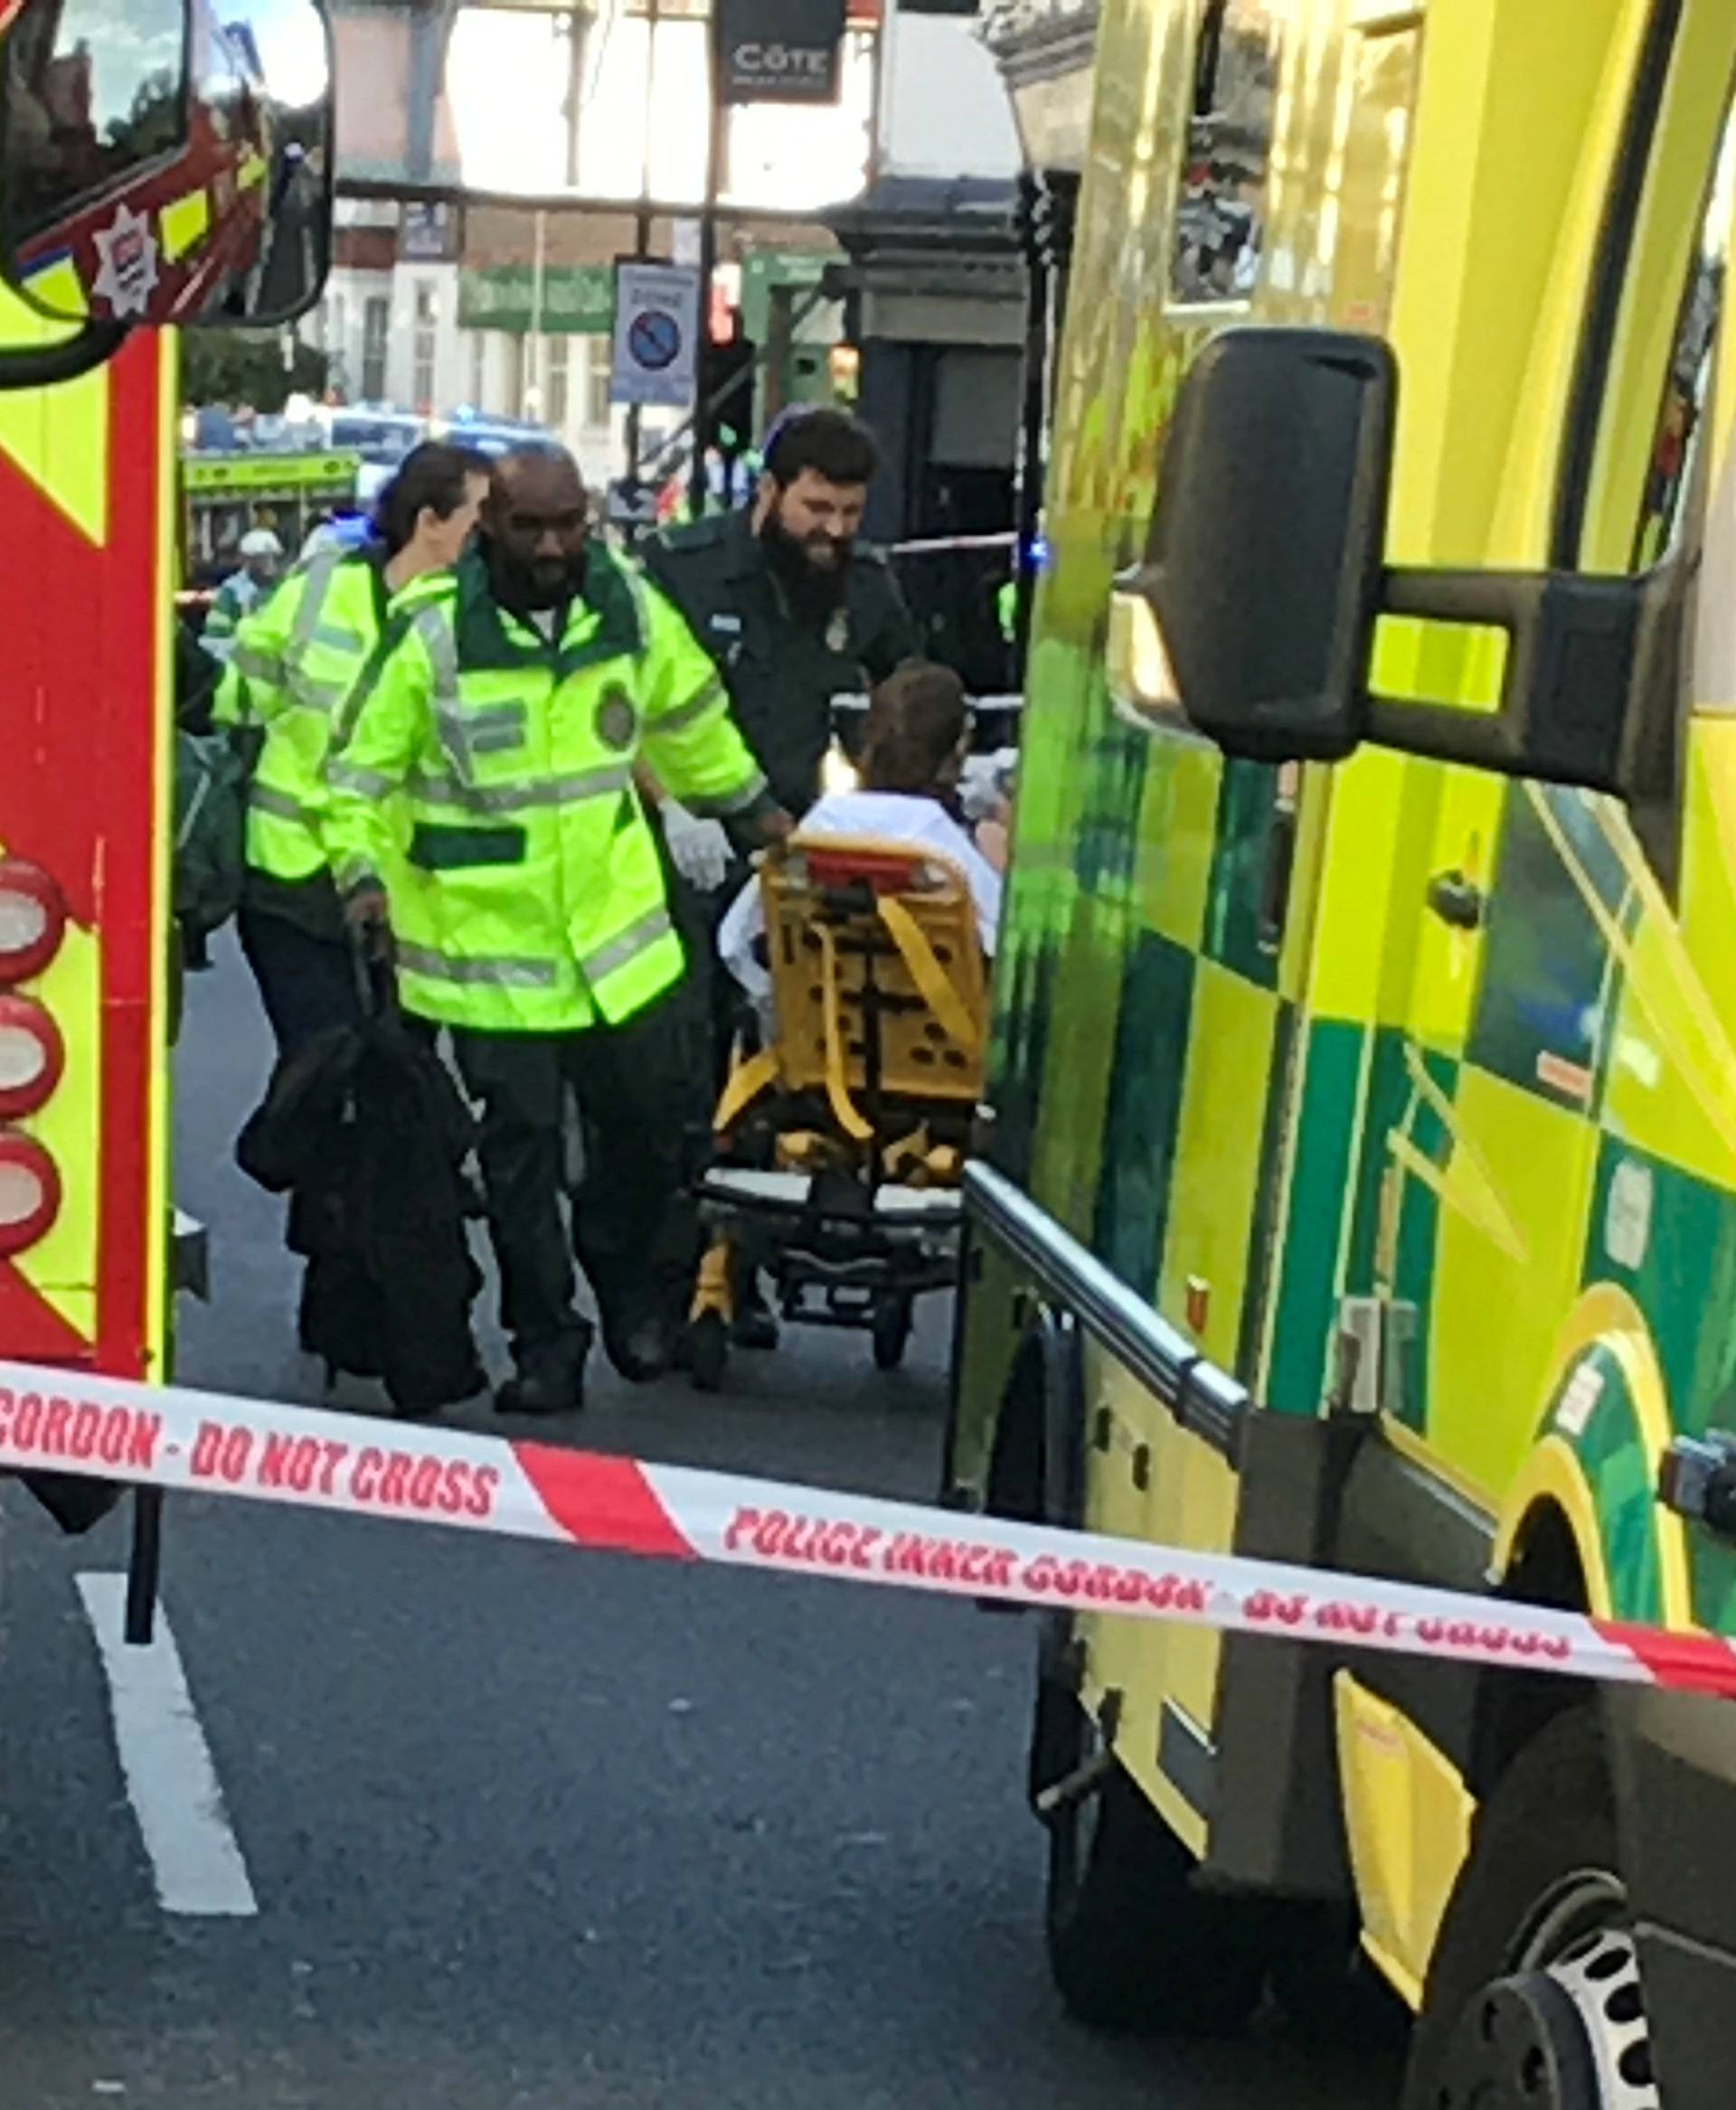 Emergency personnel attend to a person after an incident at Parsons Green underground station in London